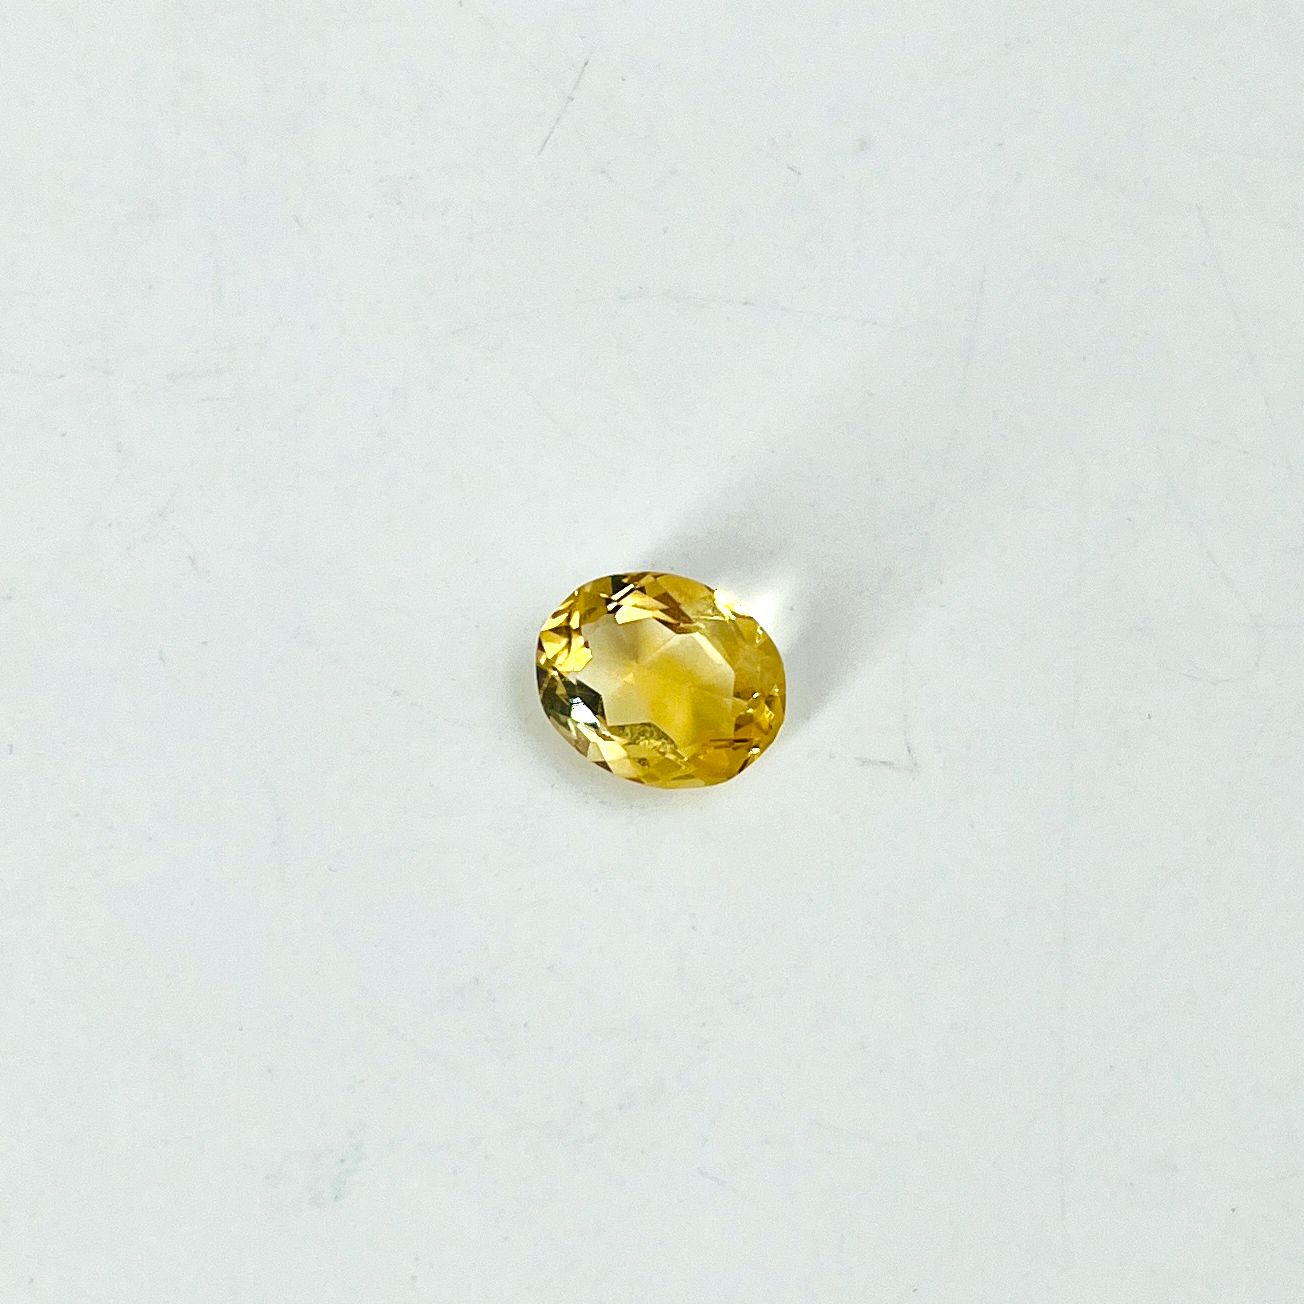 Null Oval faceted citrine weighing 5.02 cts, probably from Brazil.Size: 1.2 x 1.&hellip;